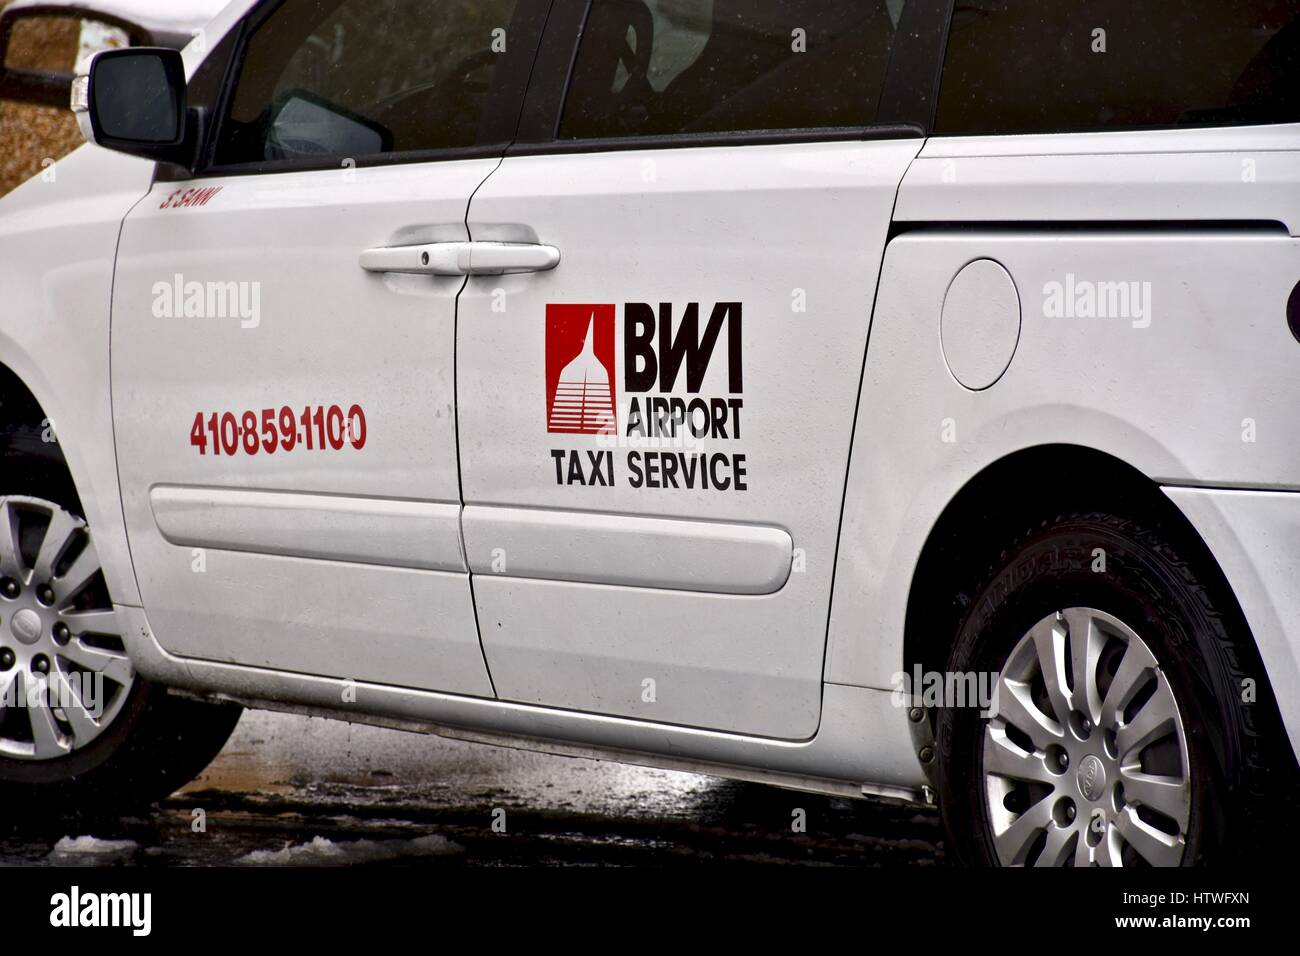 BWI airport taxi service van Stock Photo